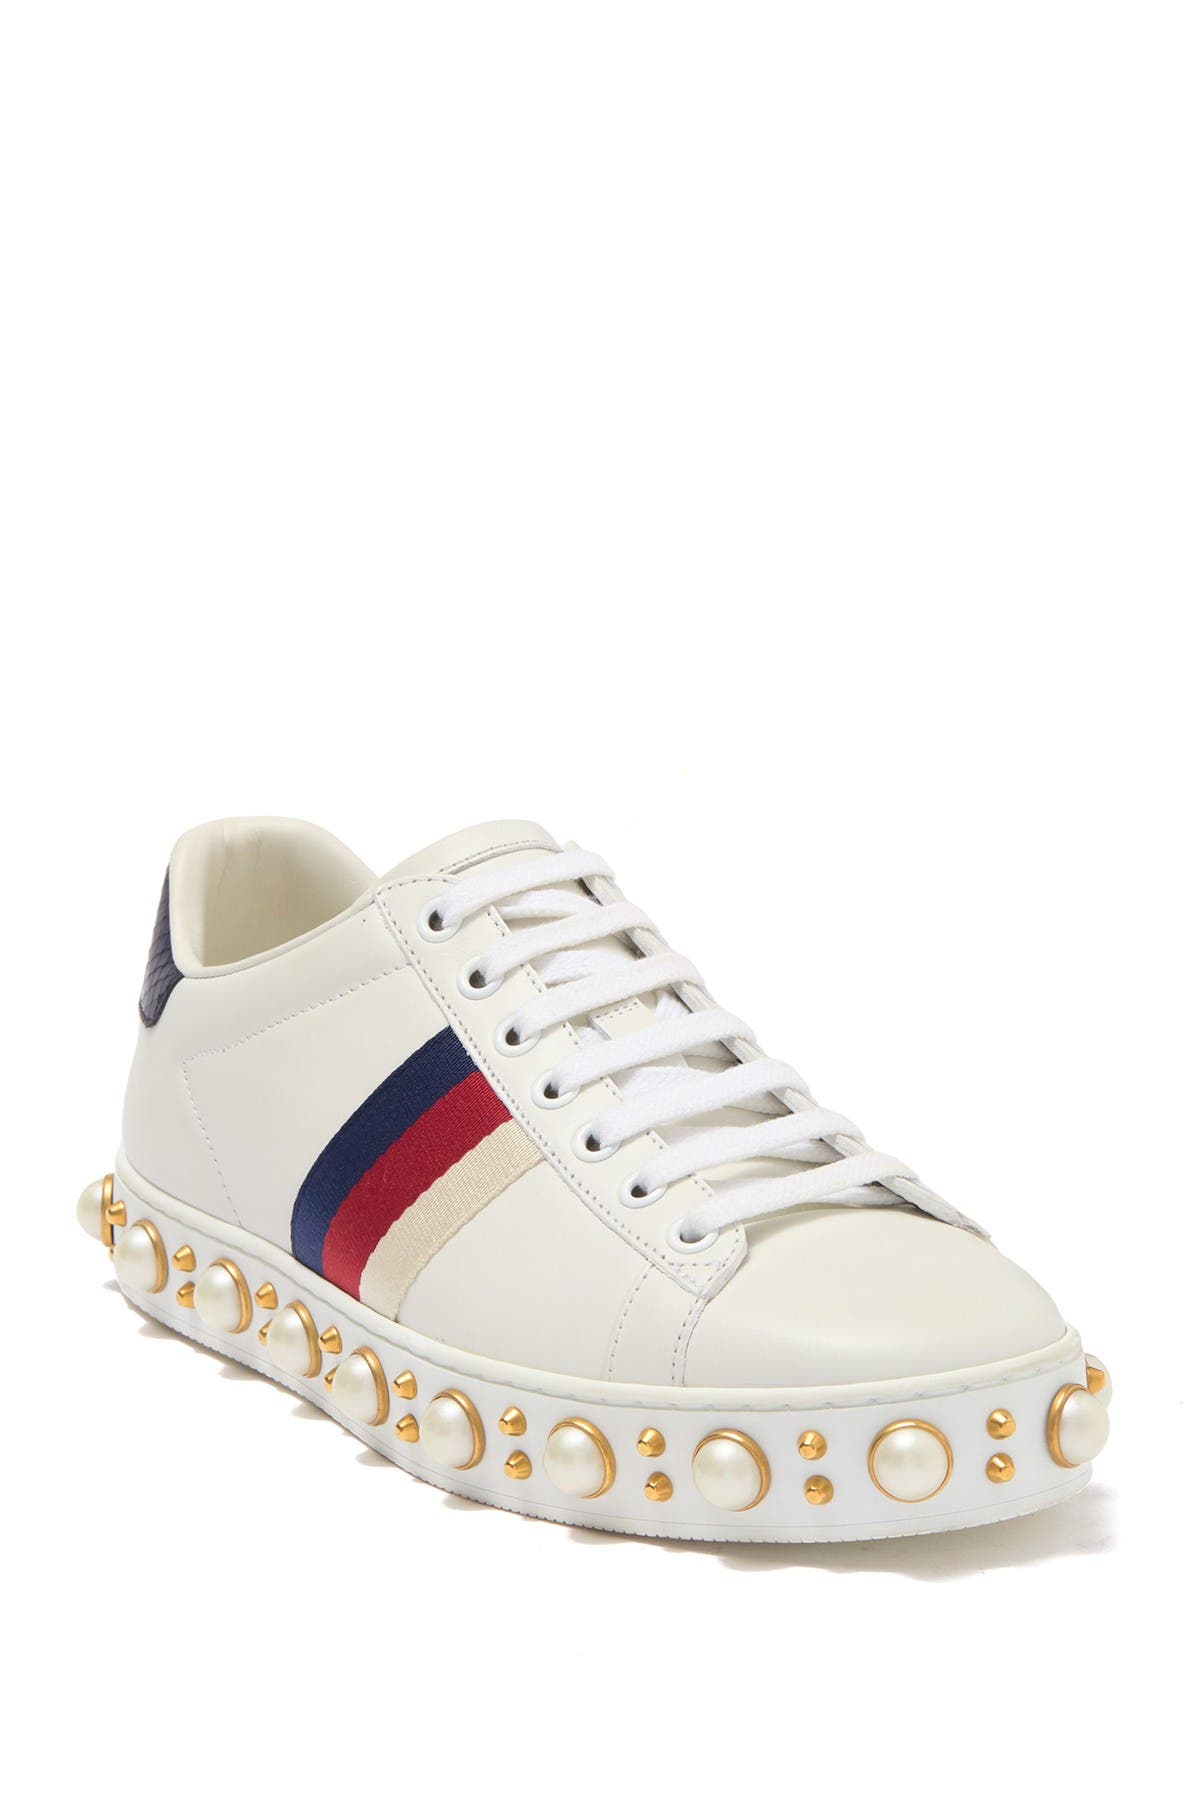 gucci ace nordstrom